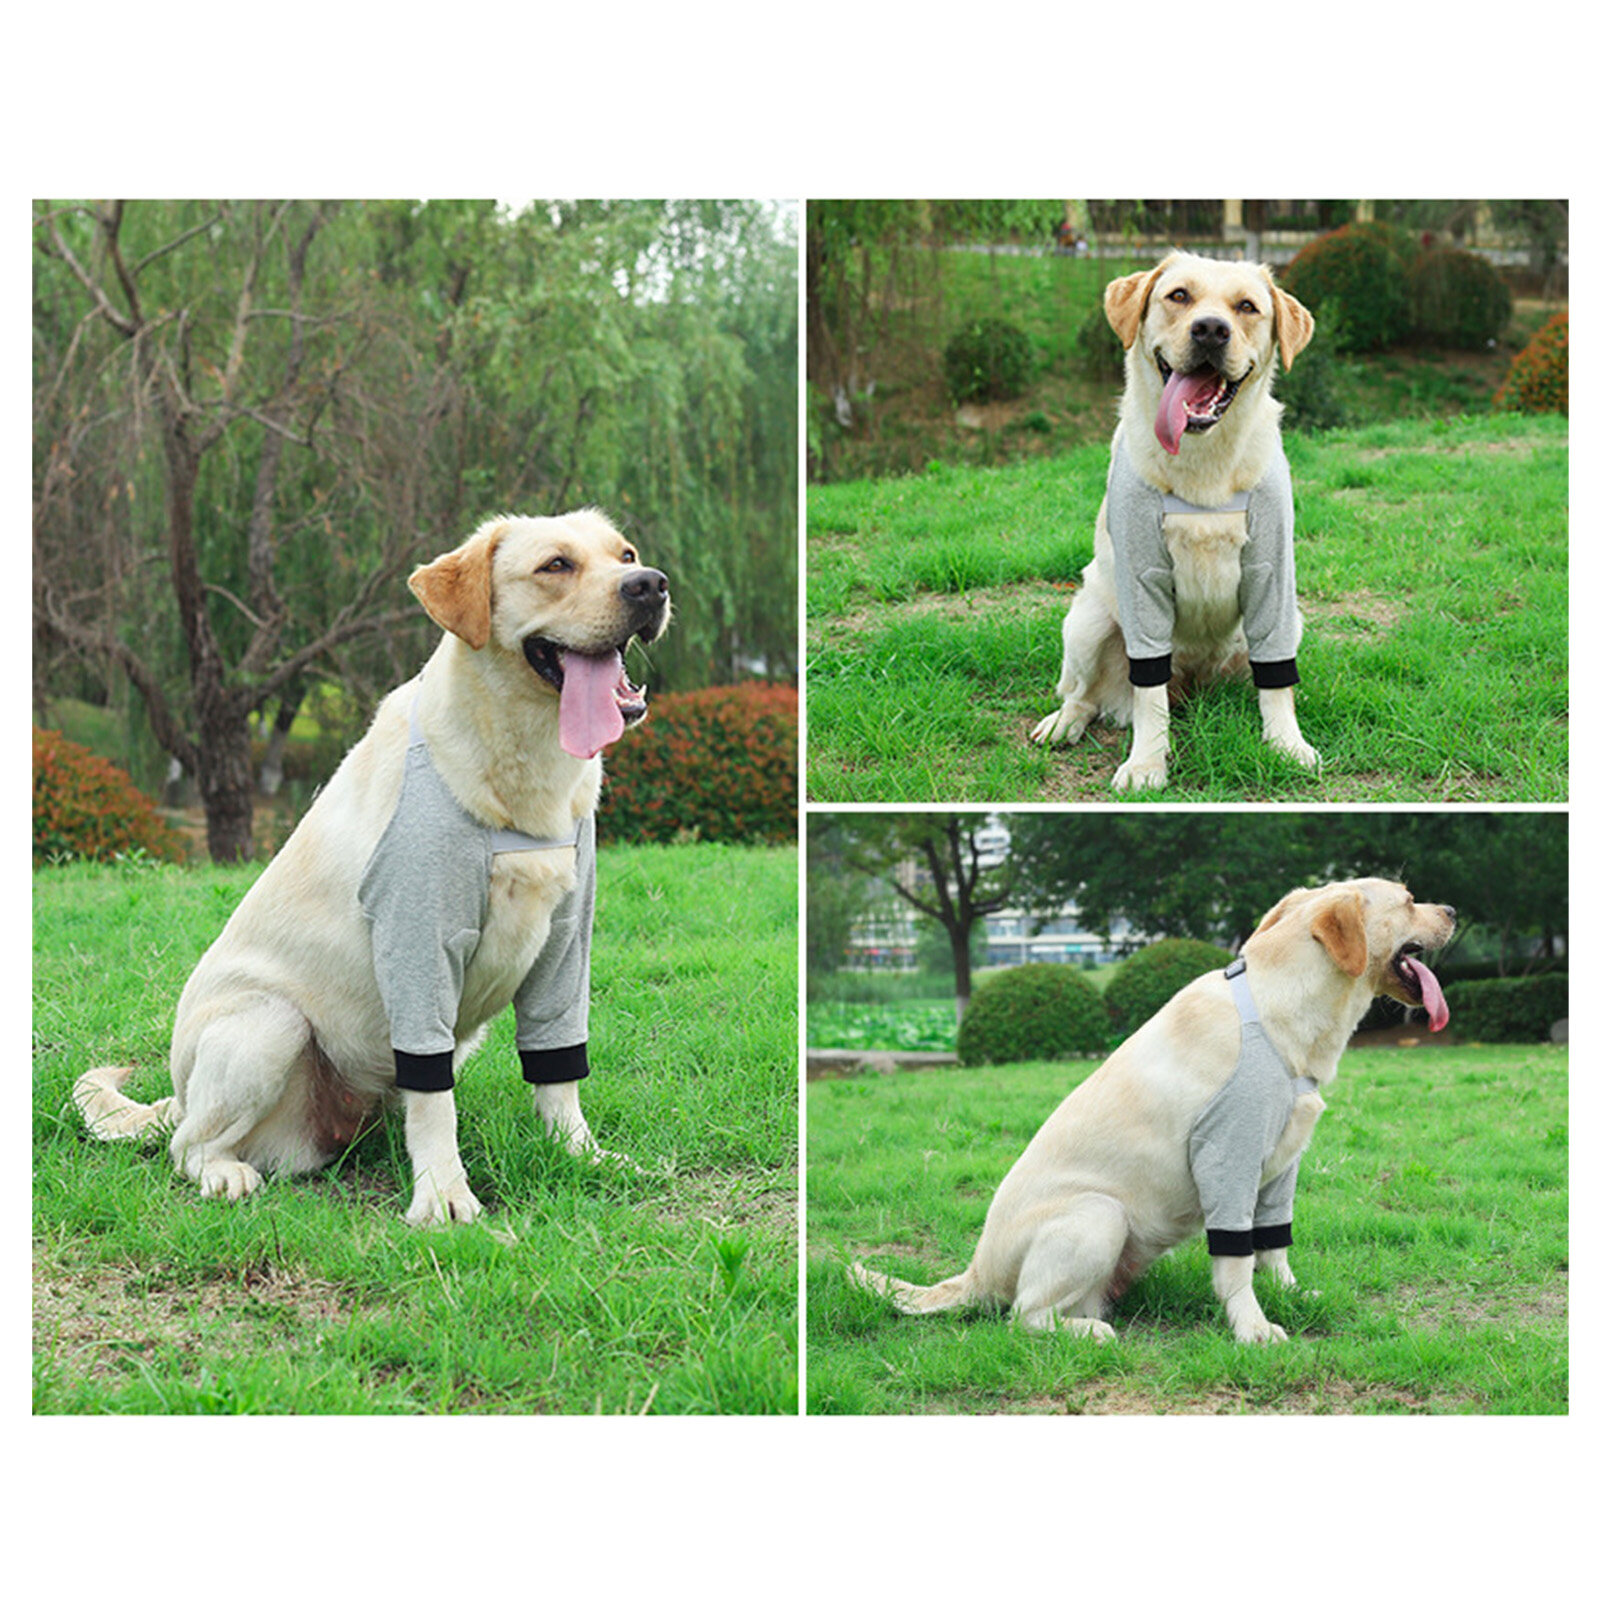  Cosiki Dog Elbow Brace Protector, Spring Webbing Dog Recovery  Front Legs Sleeve Soft Comfortable Polyester for Pet for Arthritis (S) :  寵物用品